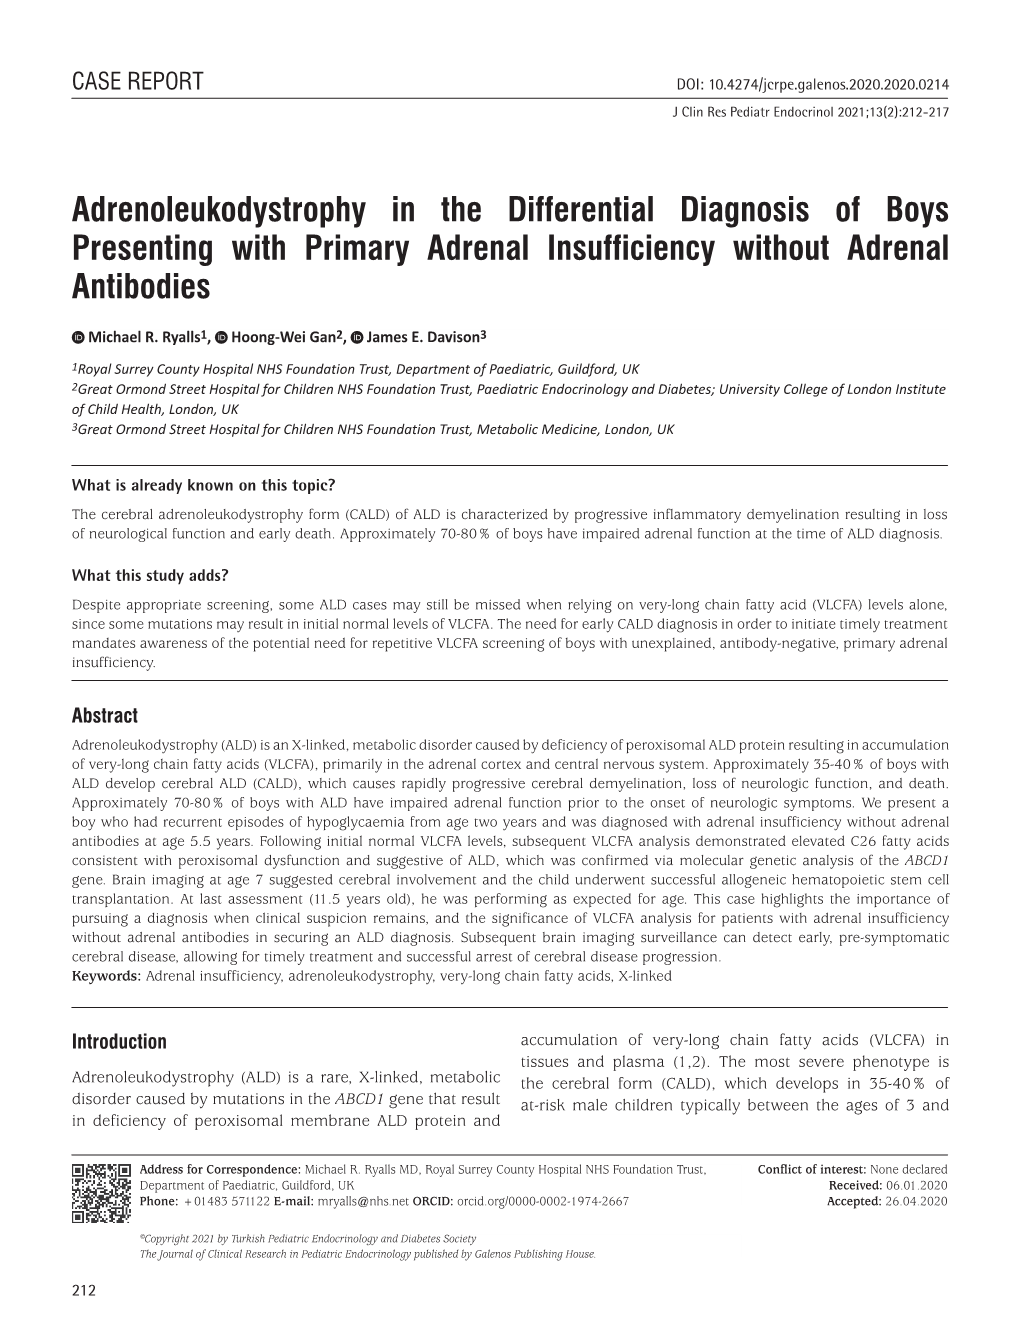 Adrenoleukodystrophy in the Differential Diagnosis of Boys Presenting with Primary Adrenal Insufficiency Without Adrenal Antibodies